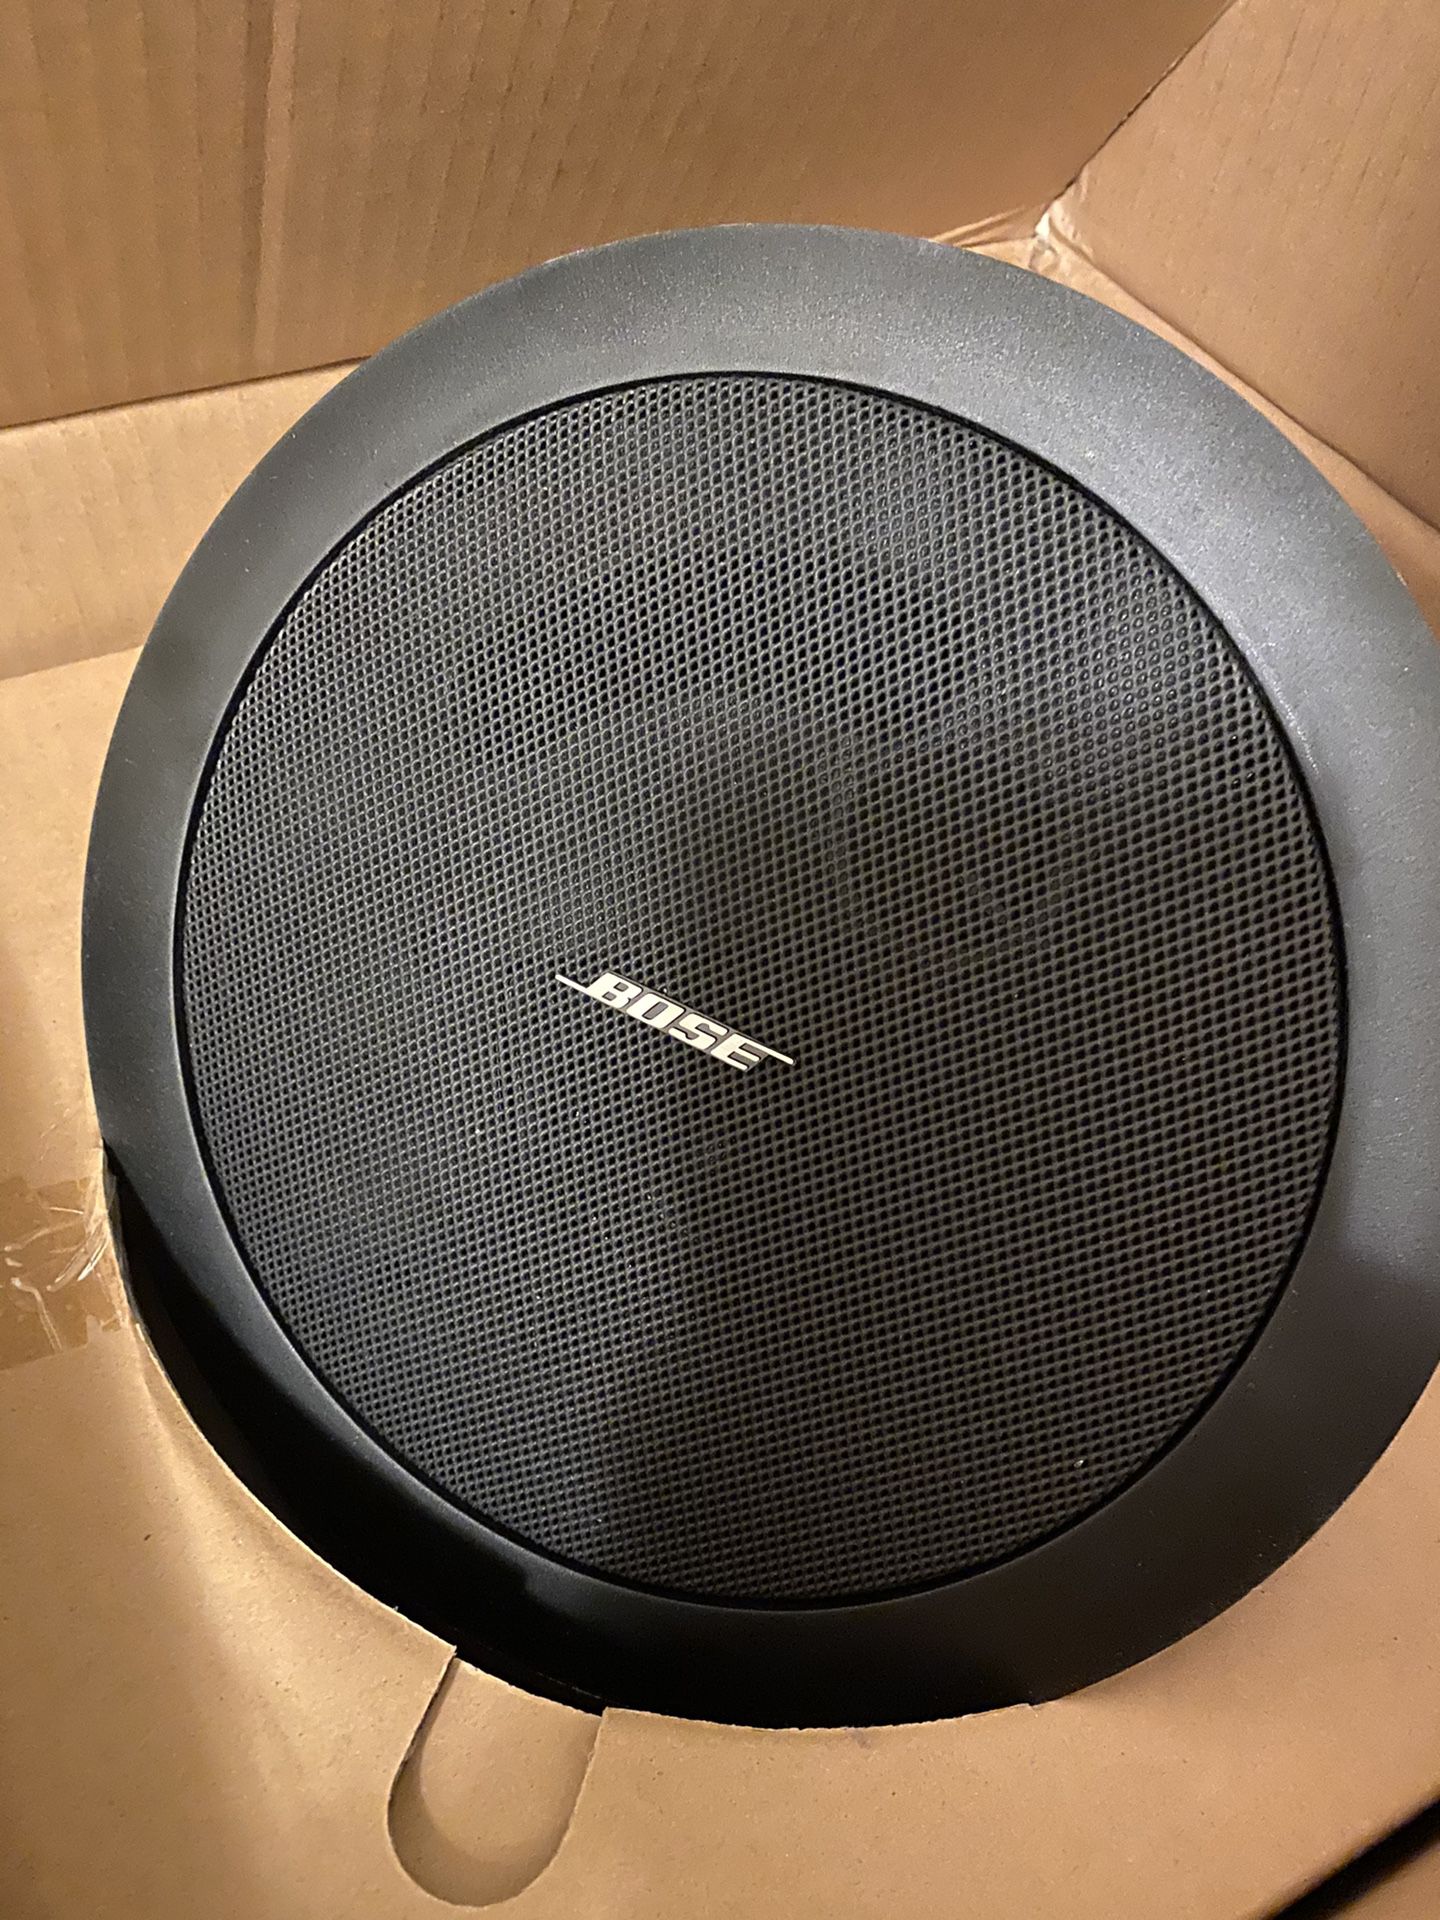 Bose DS 100 speakers x2